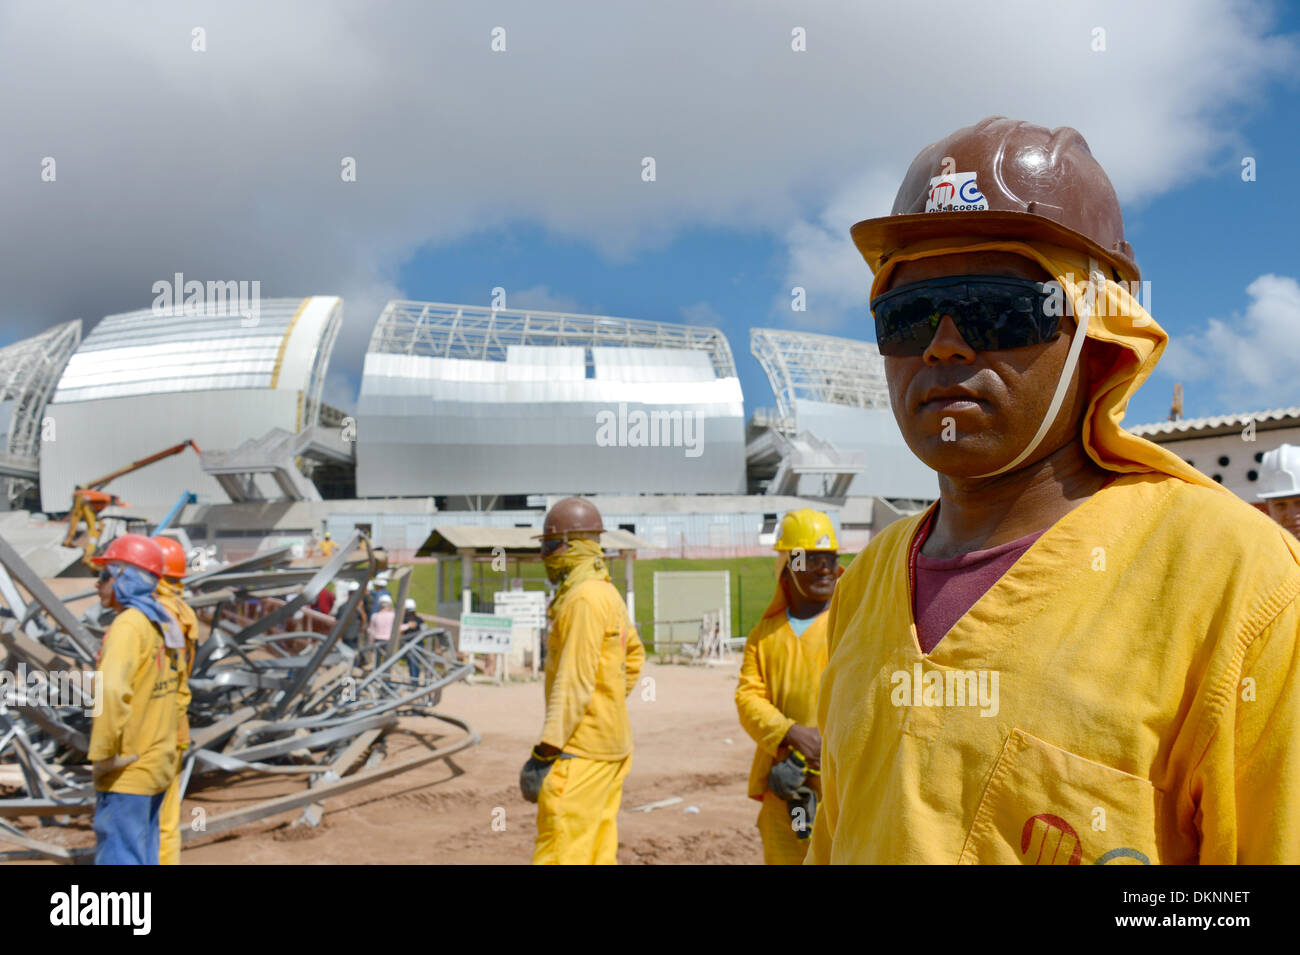 Natal, Brazil. 8th Dec, 2013. Construction workers stand on the construction site of the 'Arena das Dunas' stadium in Natal, Brazil, 8 December 2013. Photo: Marcus Brandt/dpa/Alamy Live News Stock Photo